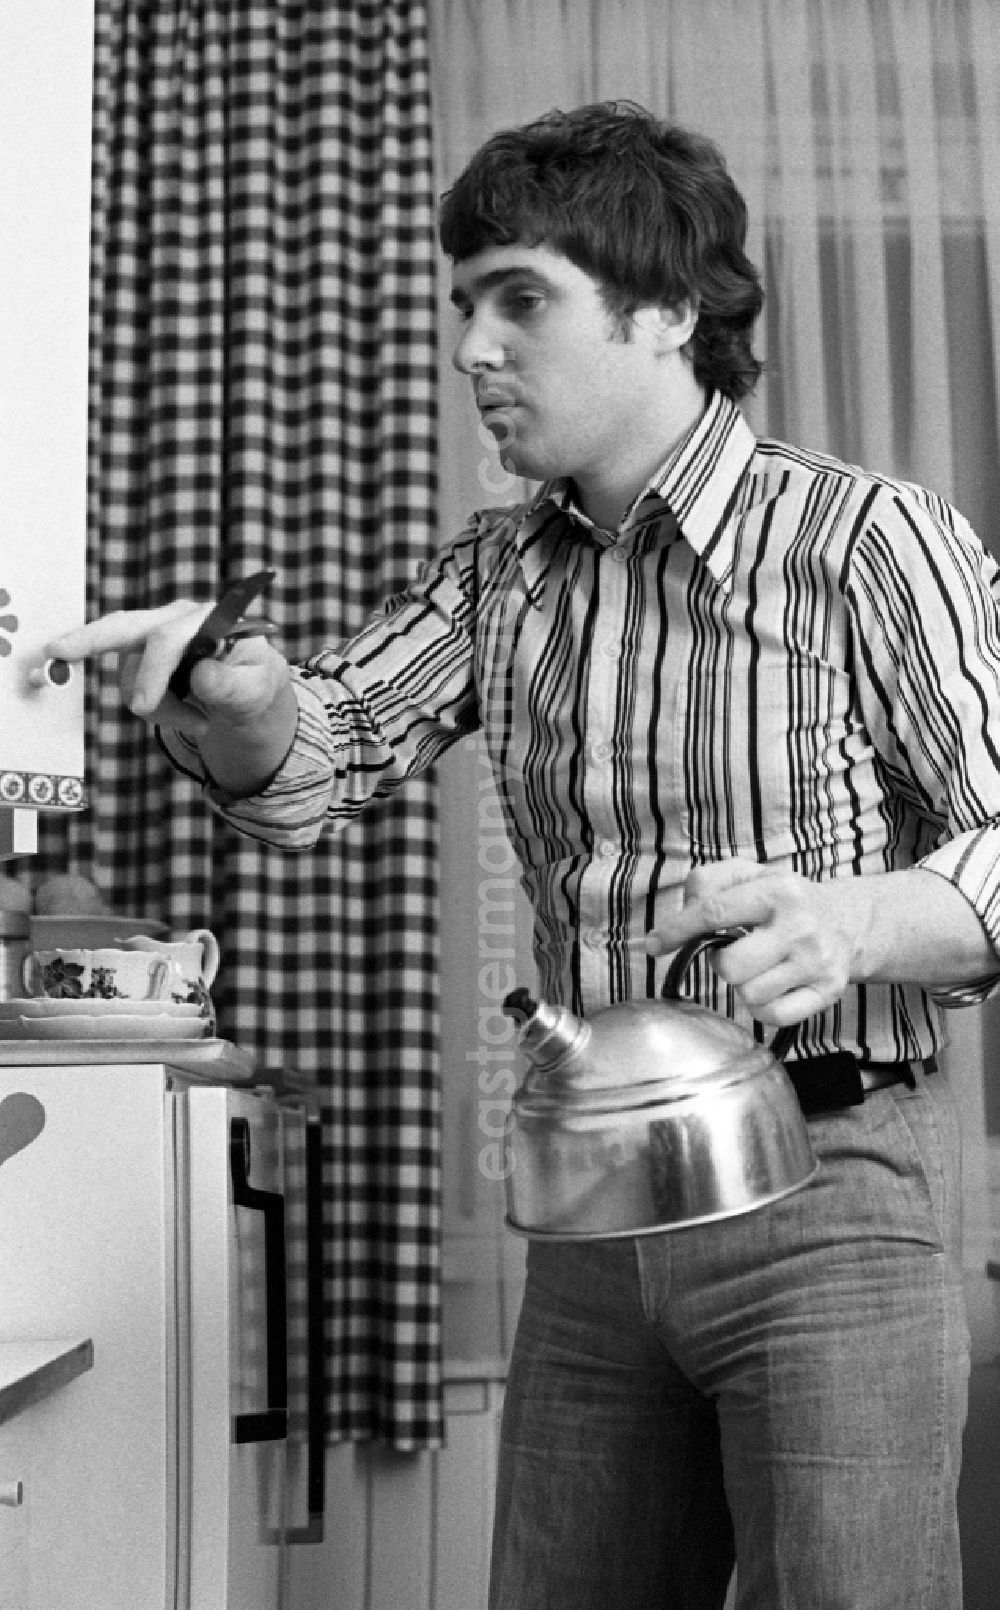 GDR picture archive: Berlin - Portrait shot of the singer and musician Frank Schoebel in the kitchen of his apartment doing housework in the district Mitte in Berlin Eastberlin, the former capital of the GDR, German Democratic Republic